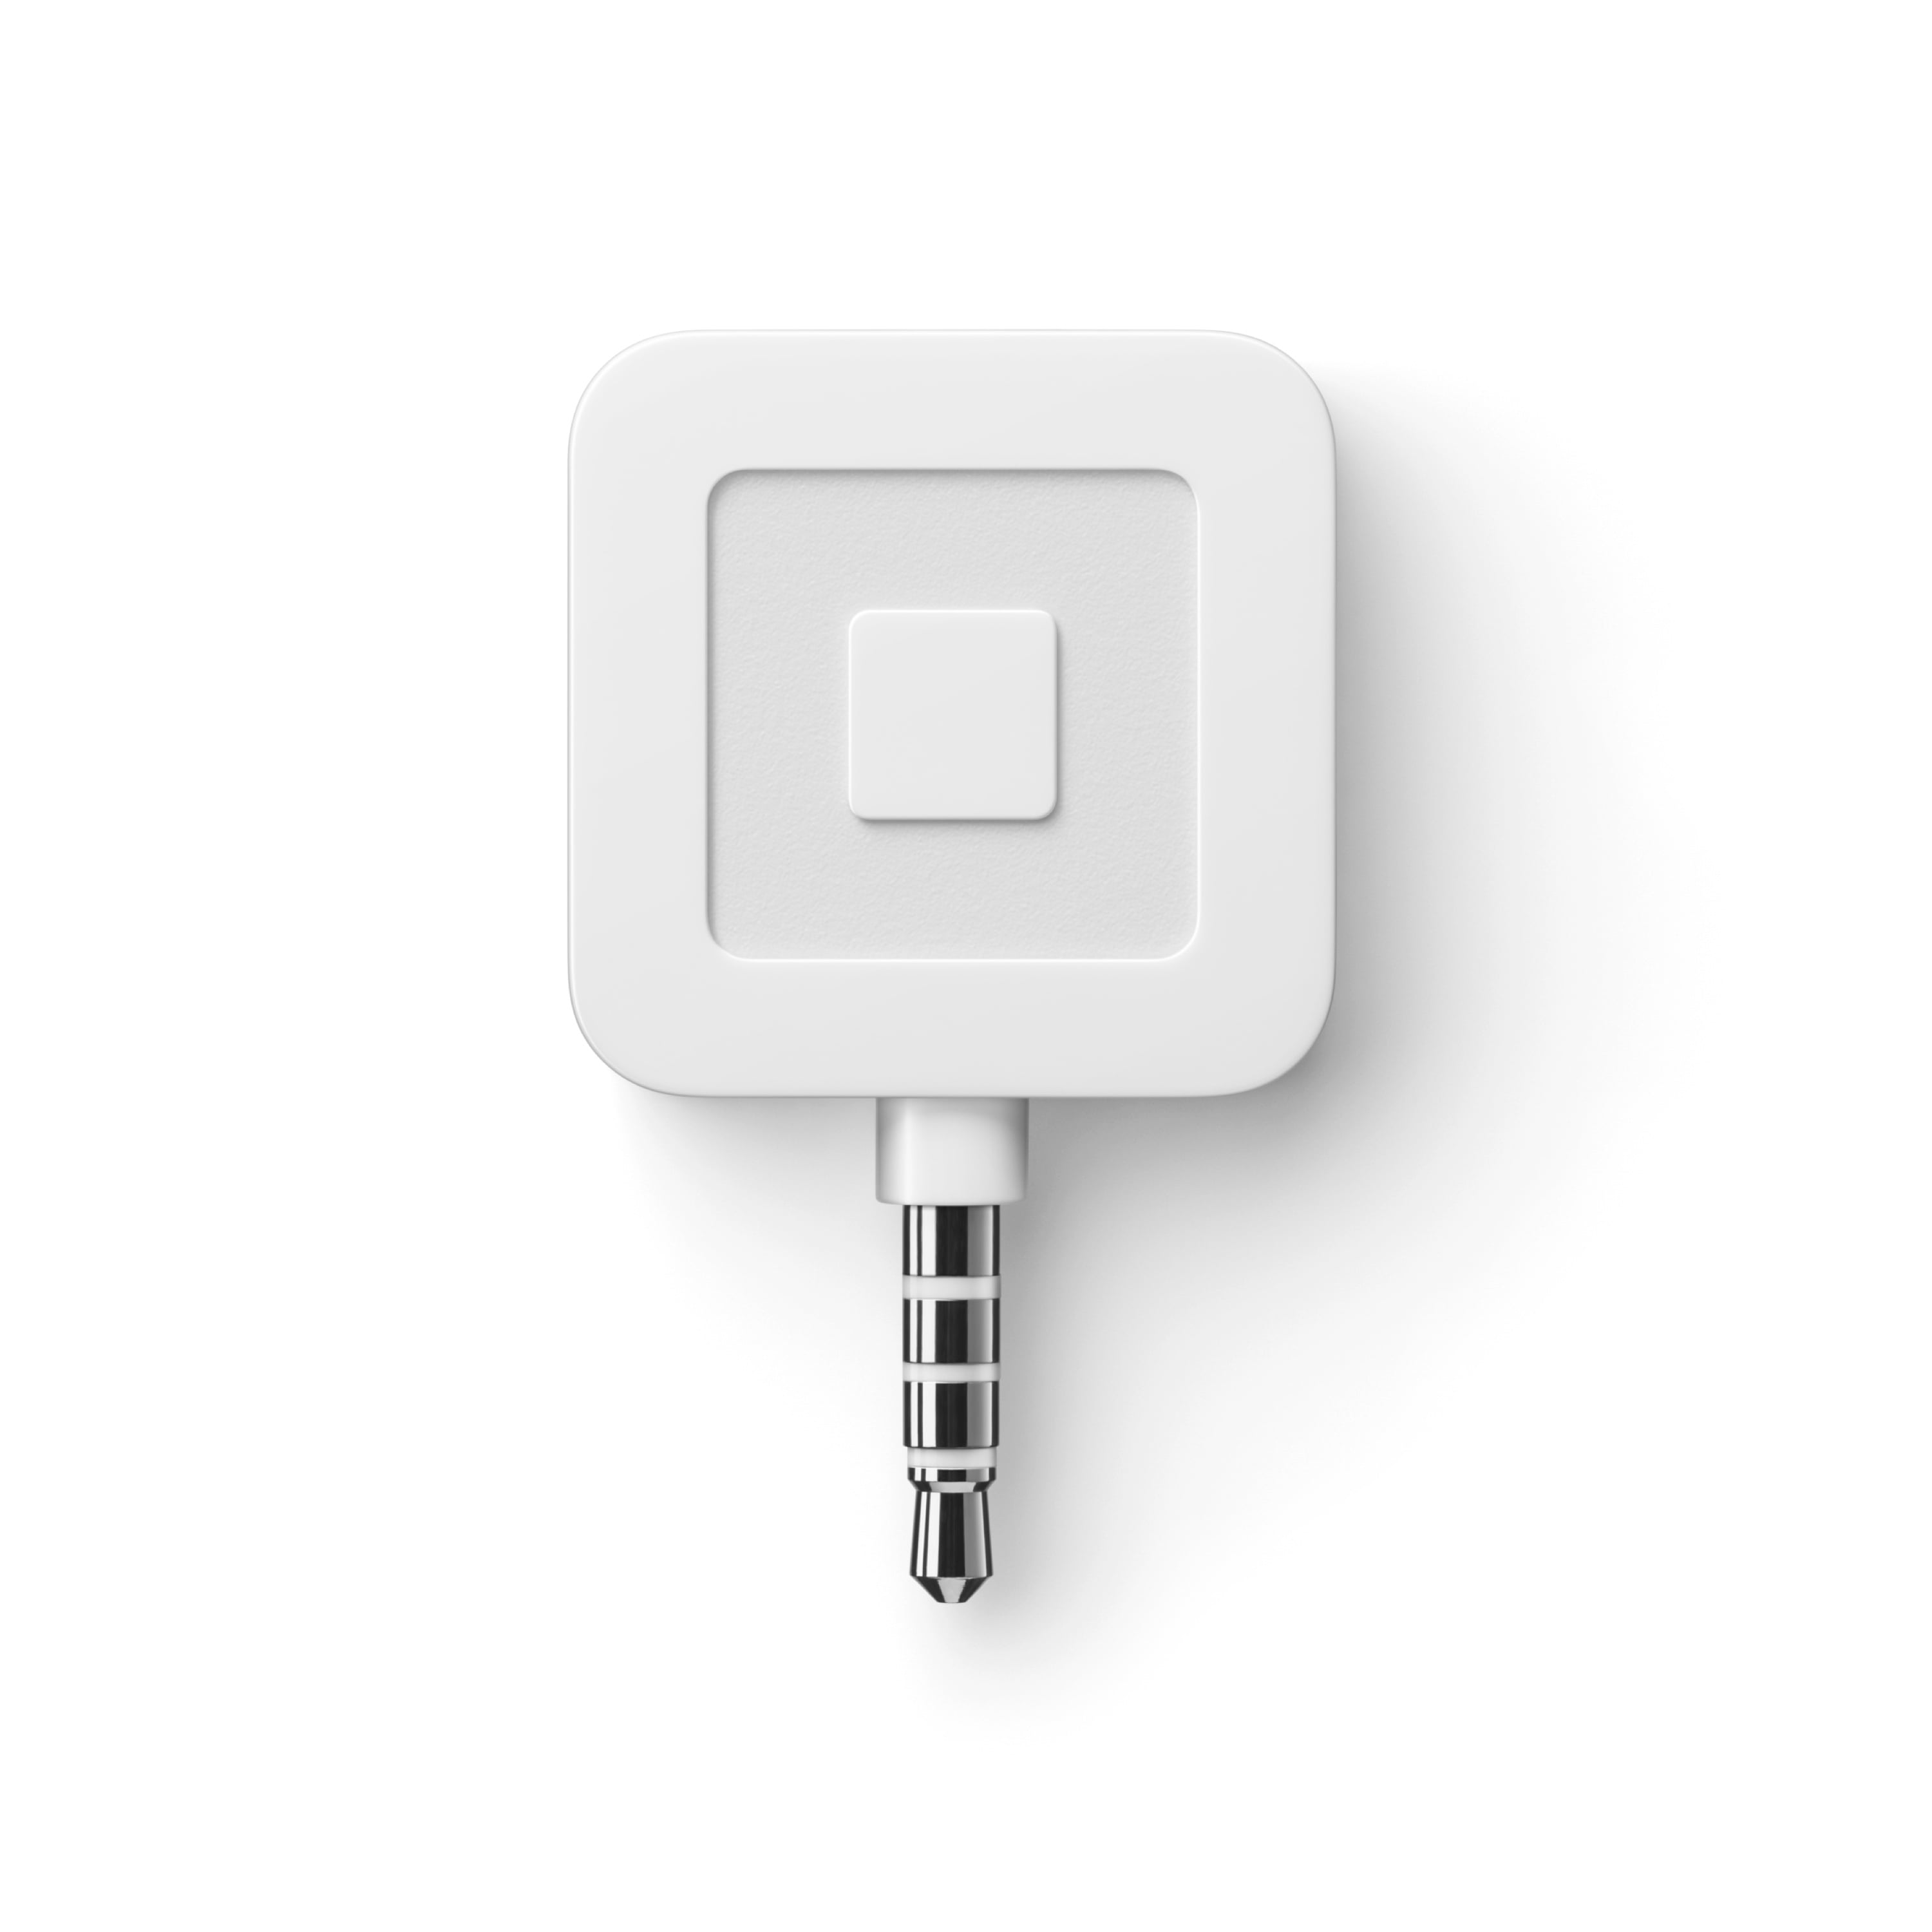 Square A-PKG-0206-01 Credit Debit Card Reader White for Apple iPhone and Andr… 